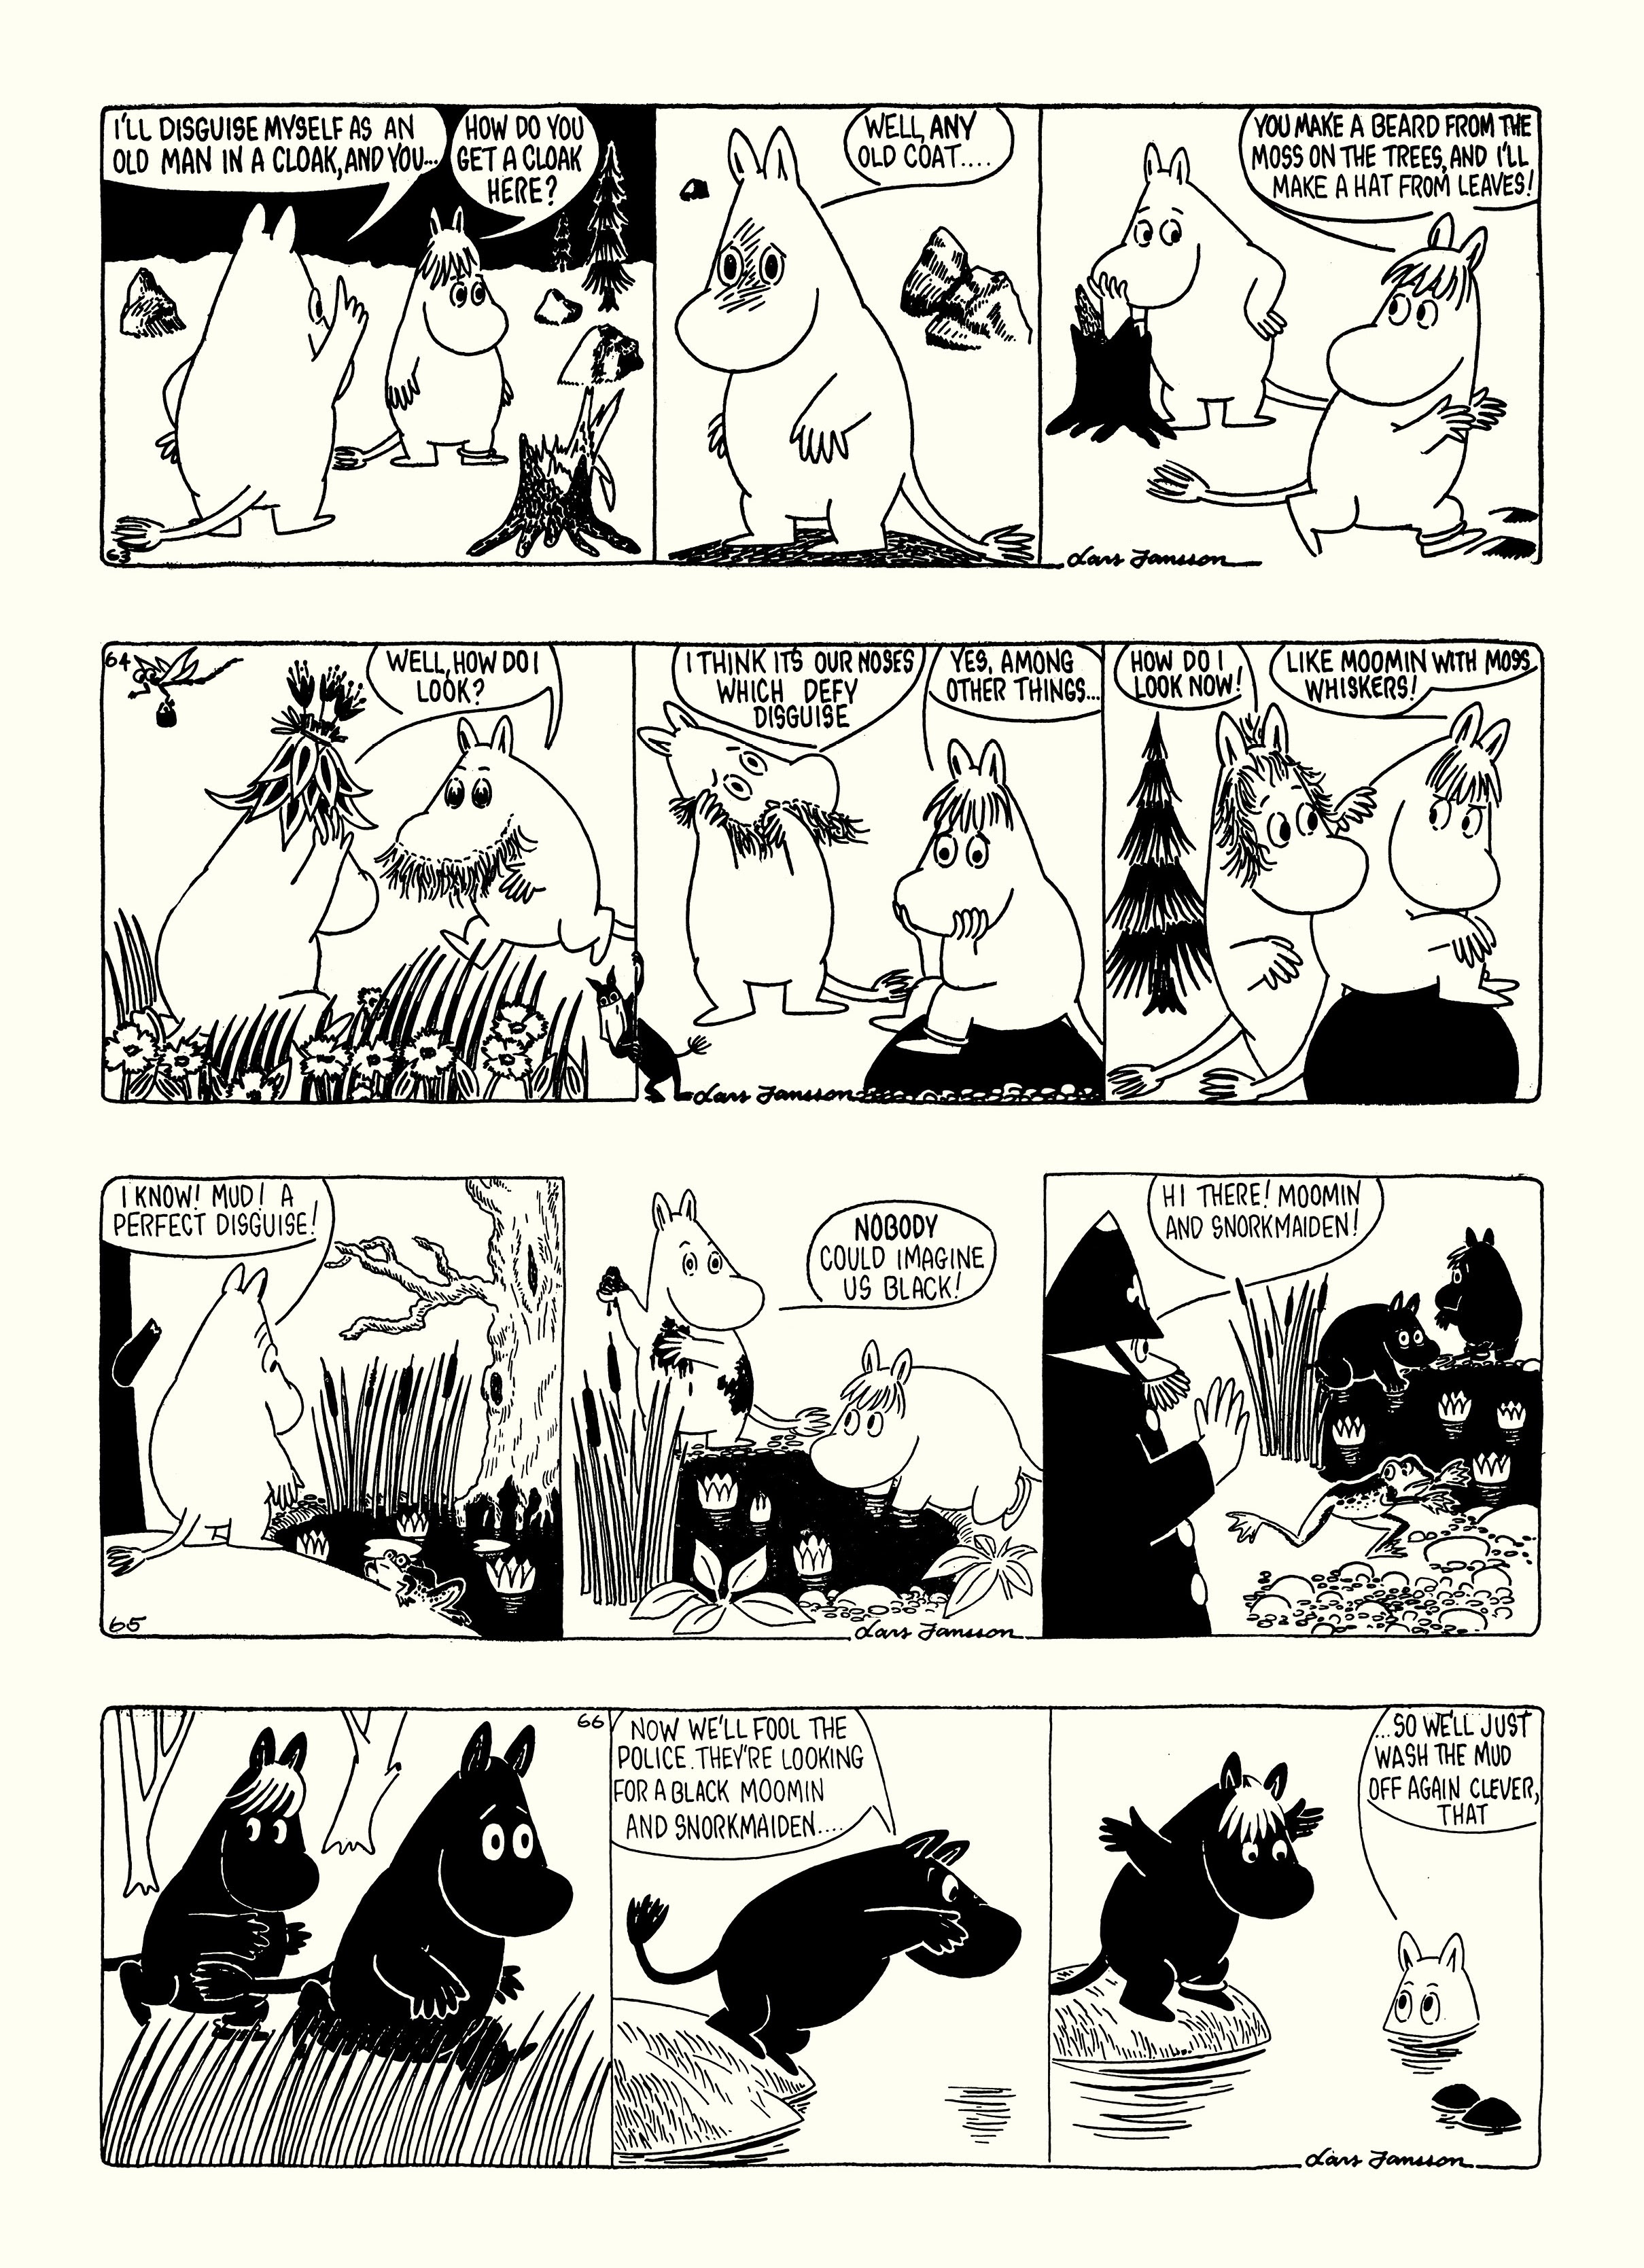 Read online Moomin: The Complete Lars Jansson Comic Strip comic -  Issue # TPB 6 - 22